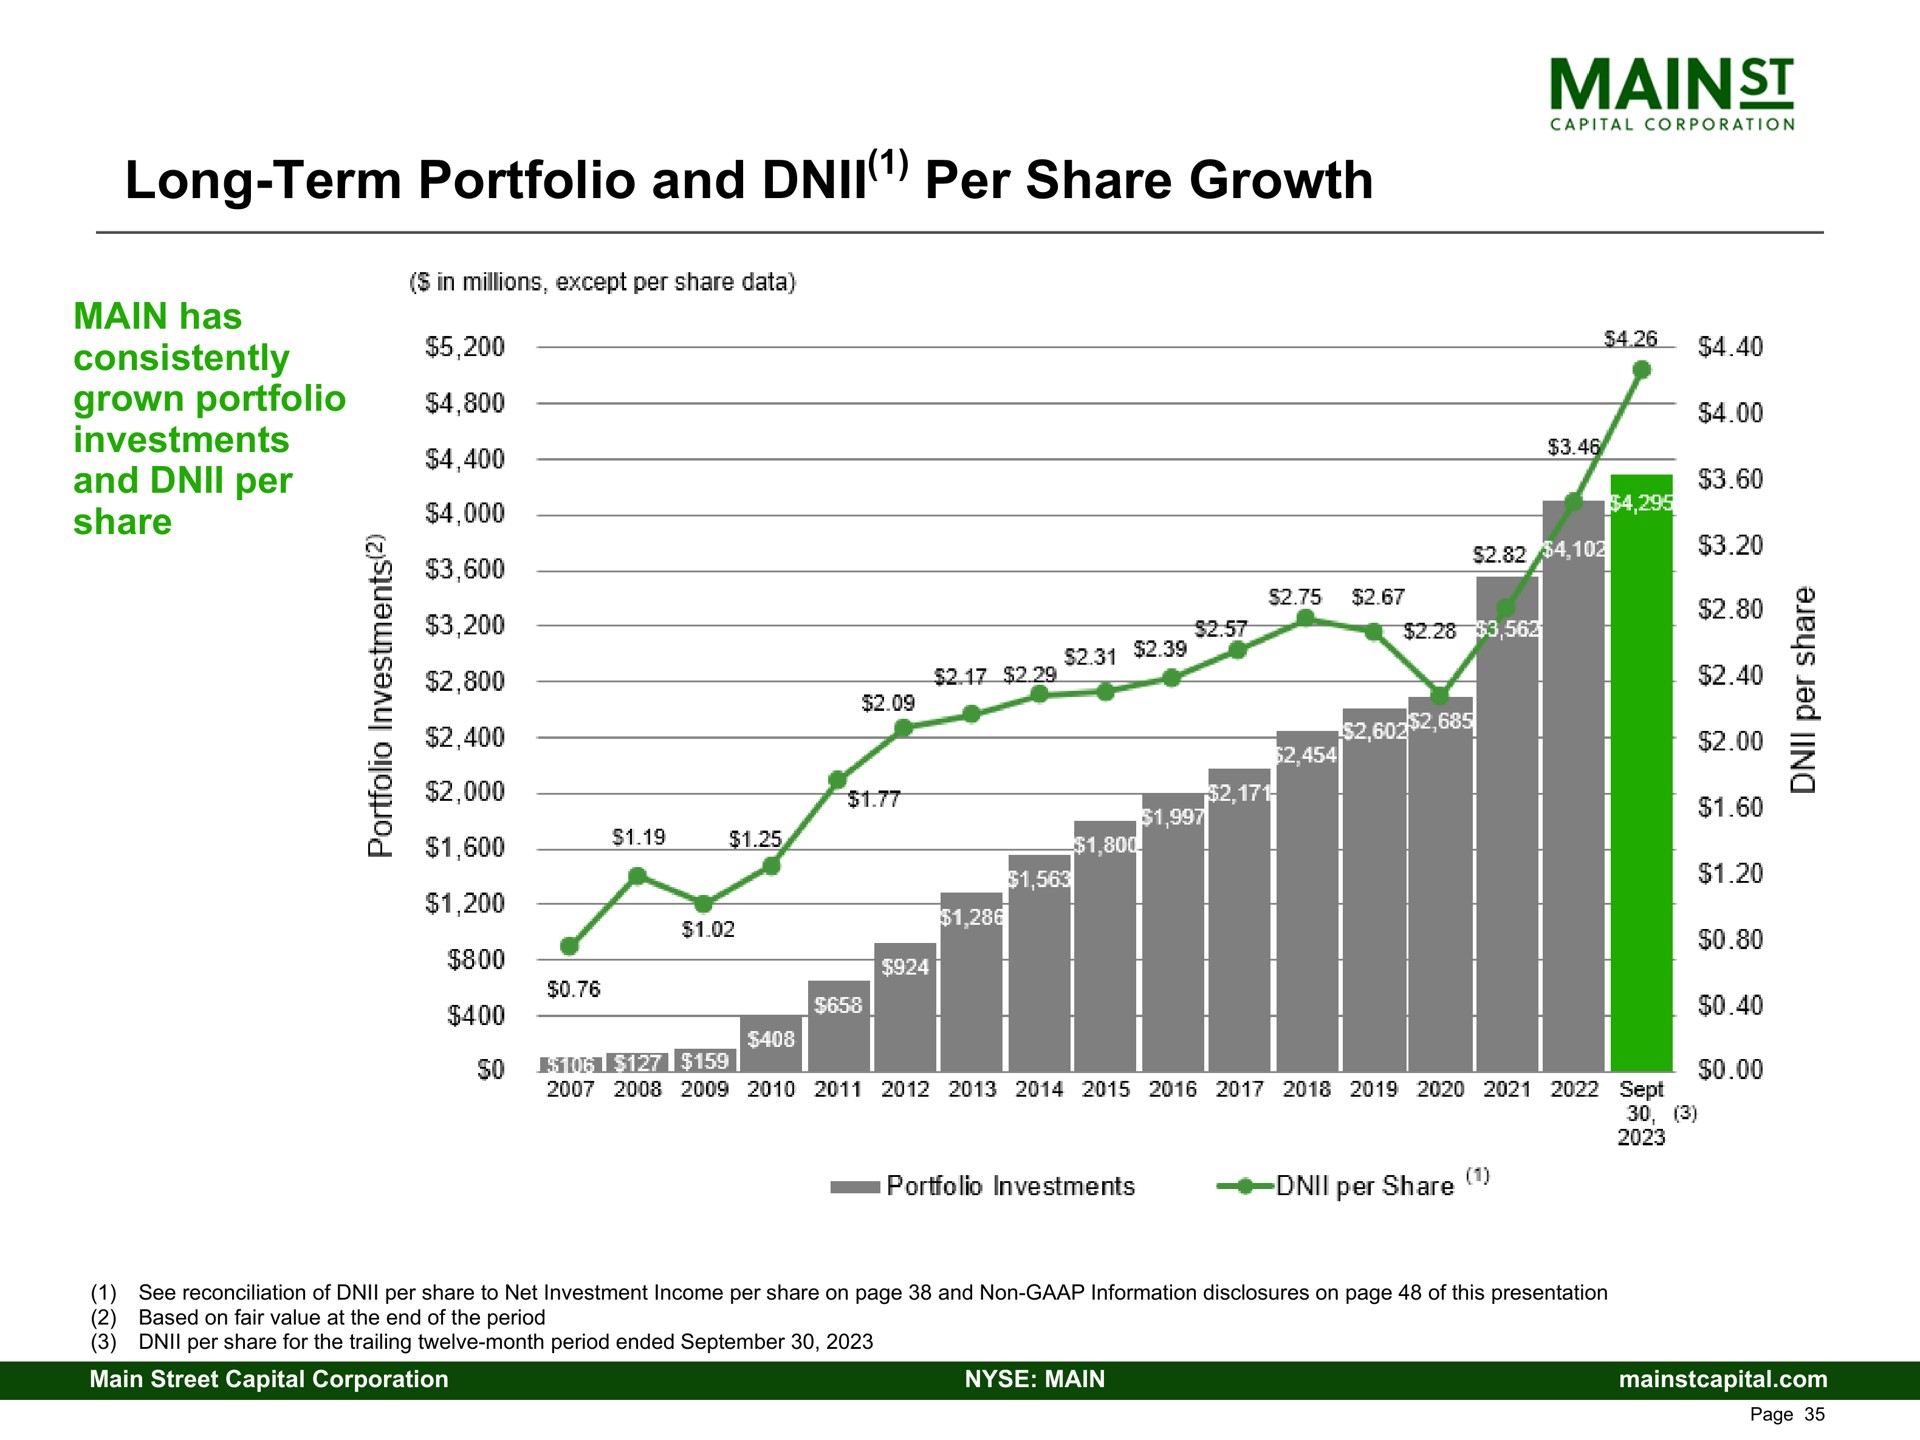 long term portfolio and per share growth consistently | Main Street Capital